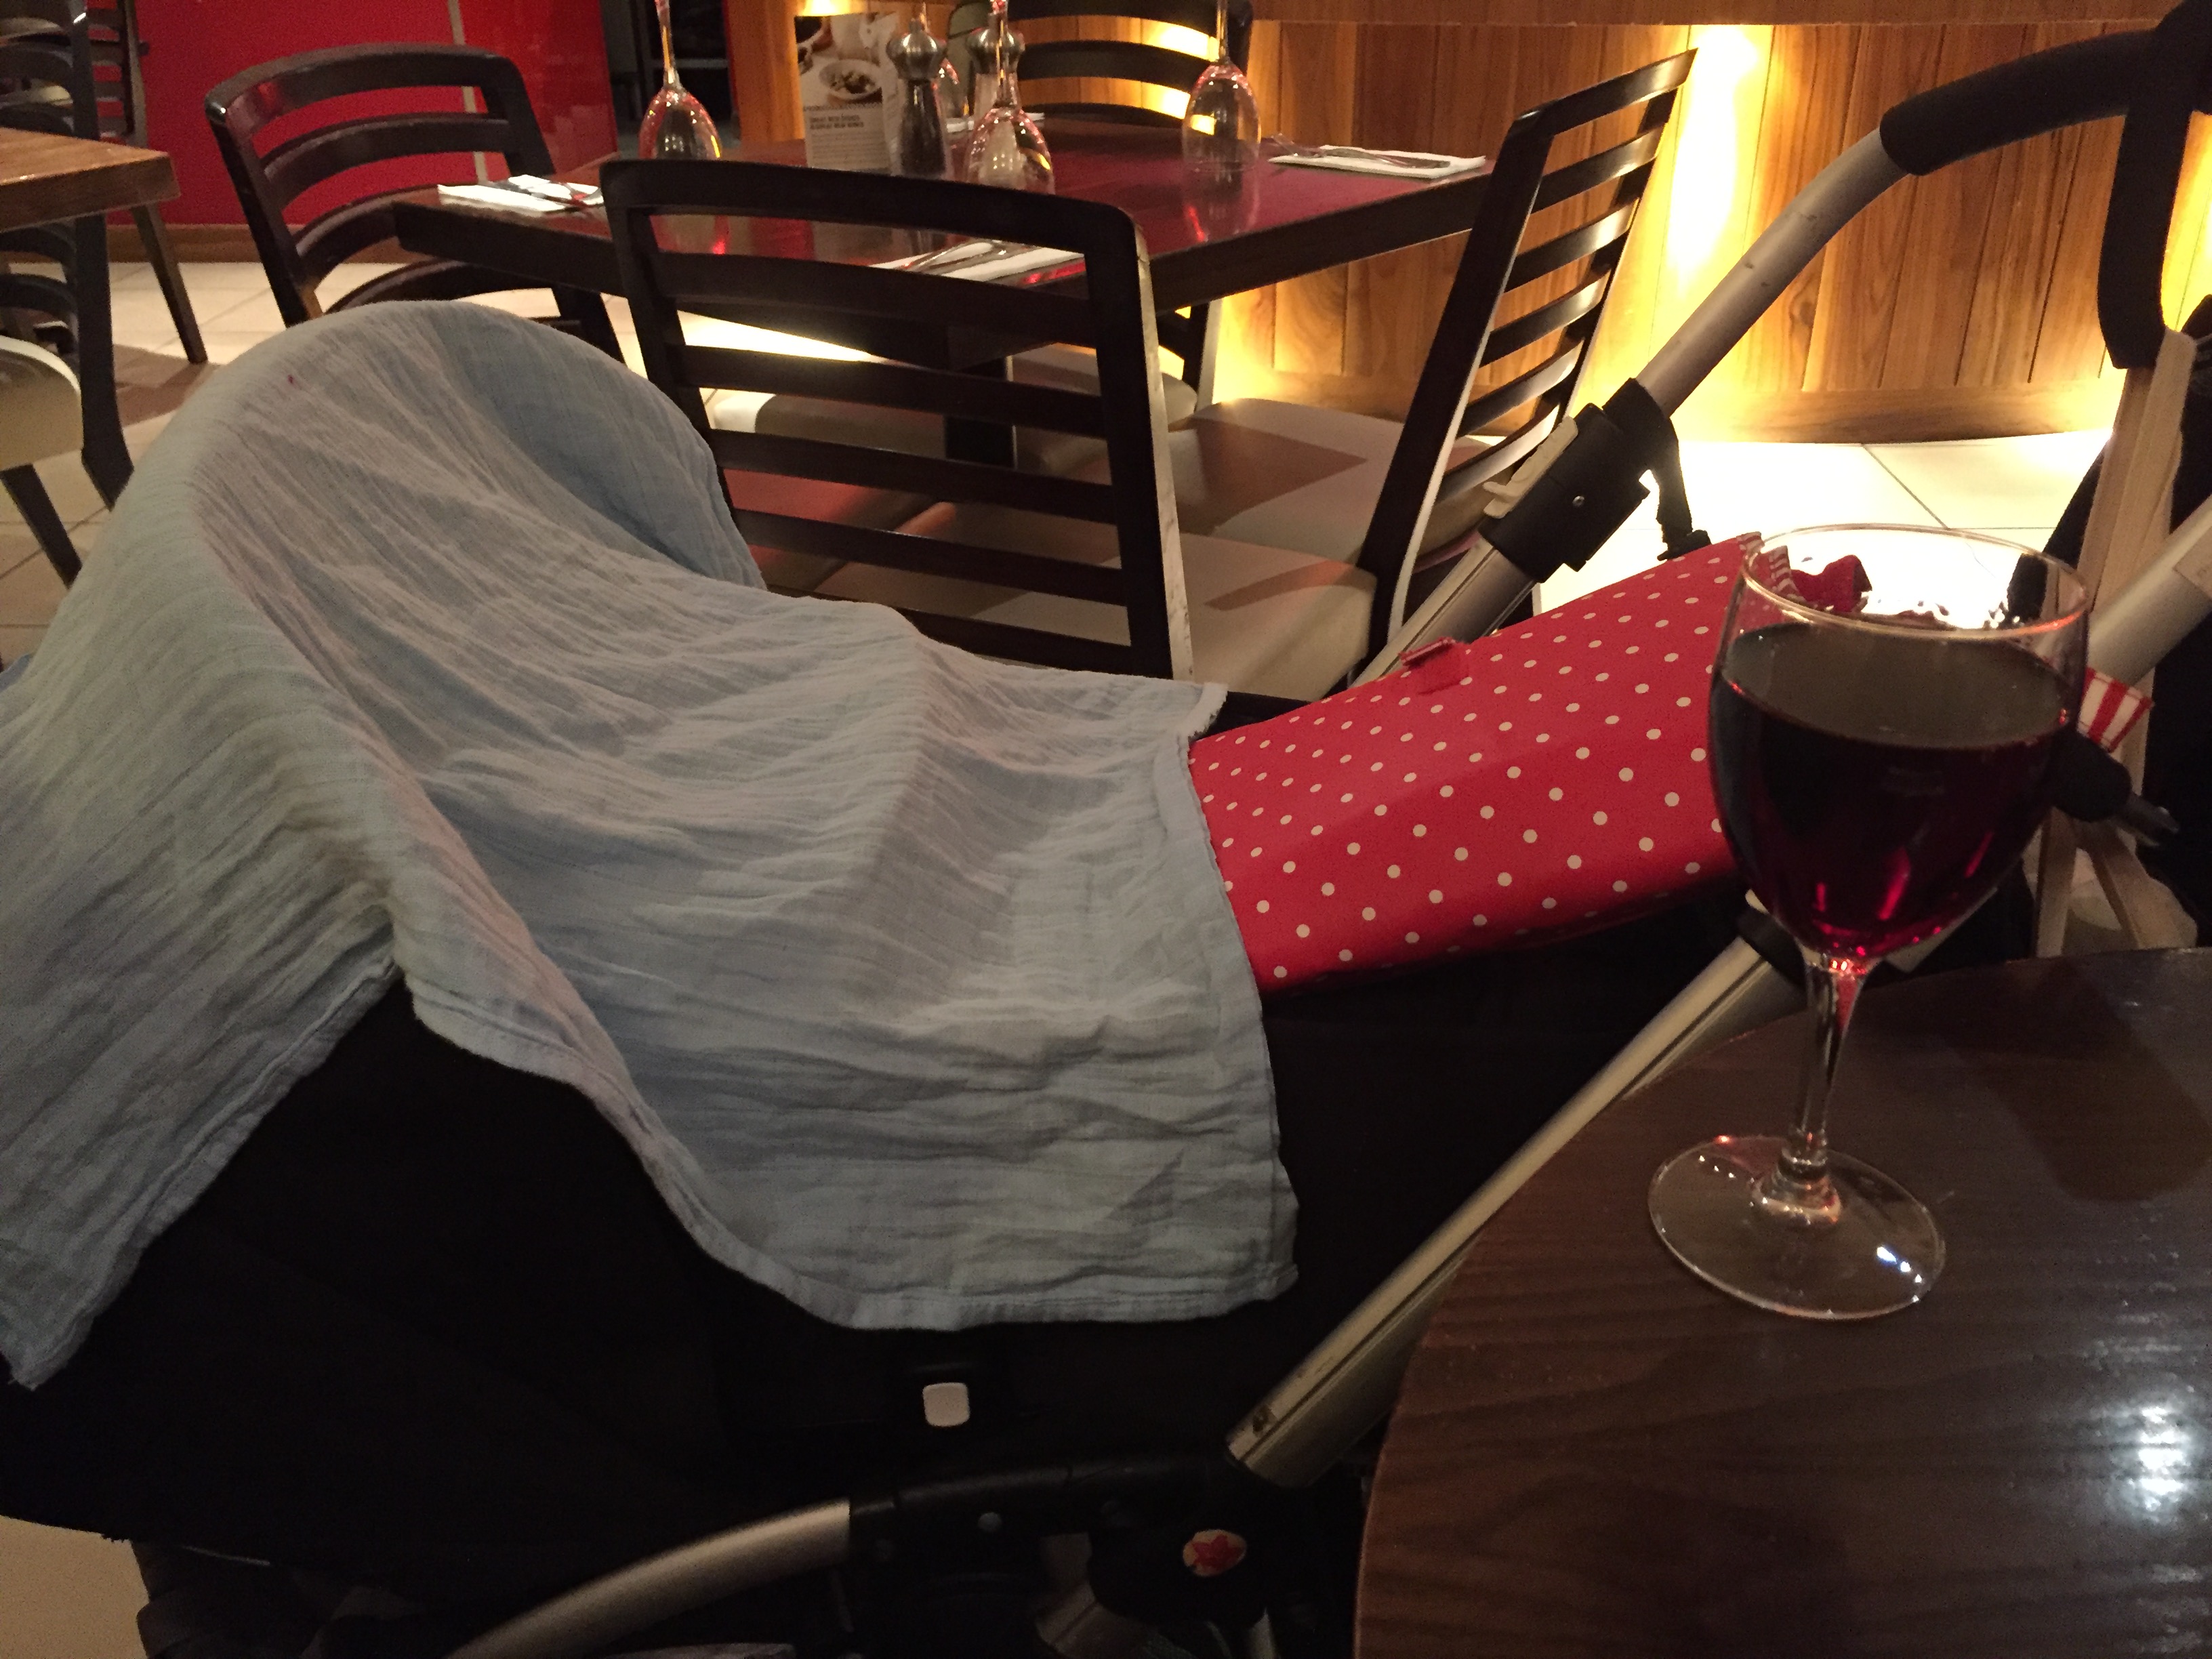 A pram with a cloth covering a sleeping baby is parked next to a restaurant table with a glass of red wine on it